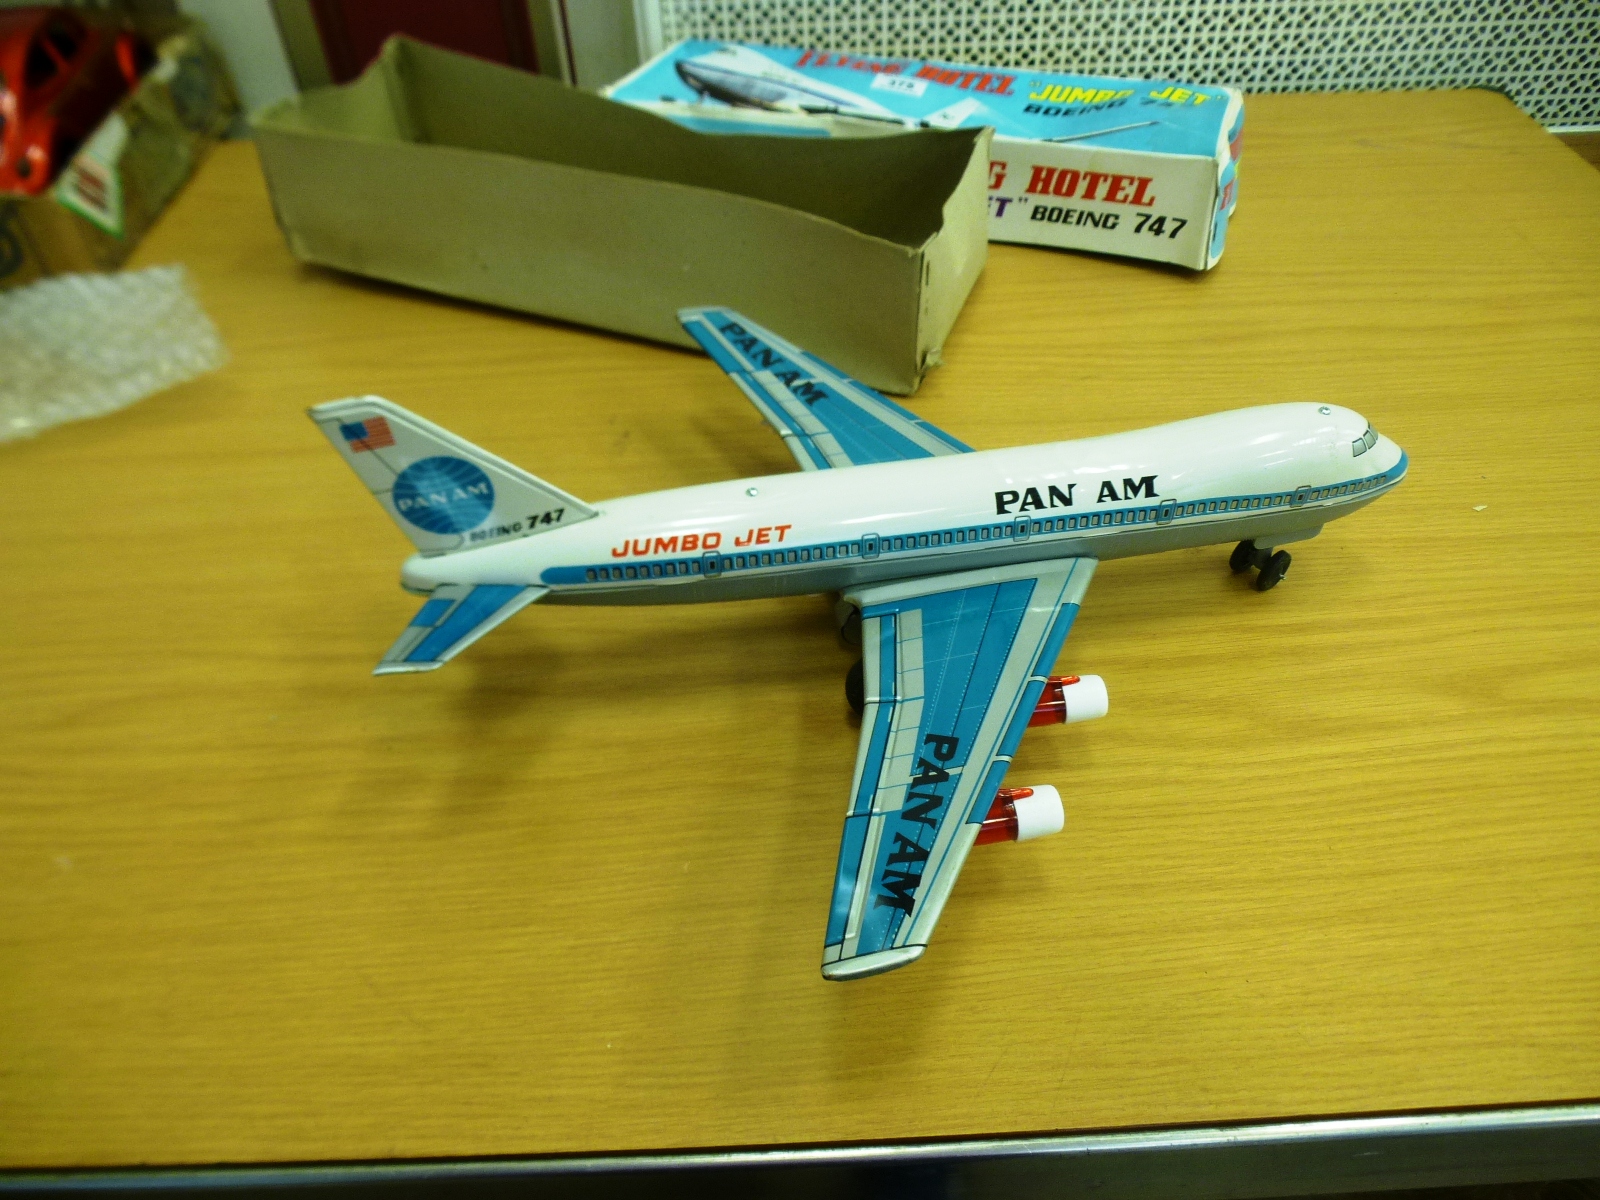 BOXED FLYING HOTEL PAN AM JUMBO JET BOEING 747 BY T.T. JAPAN - Image 3 of 3